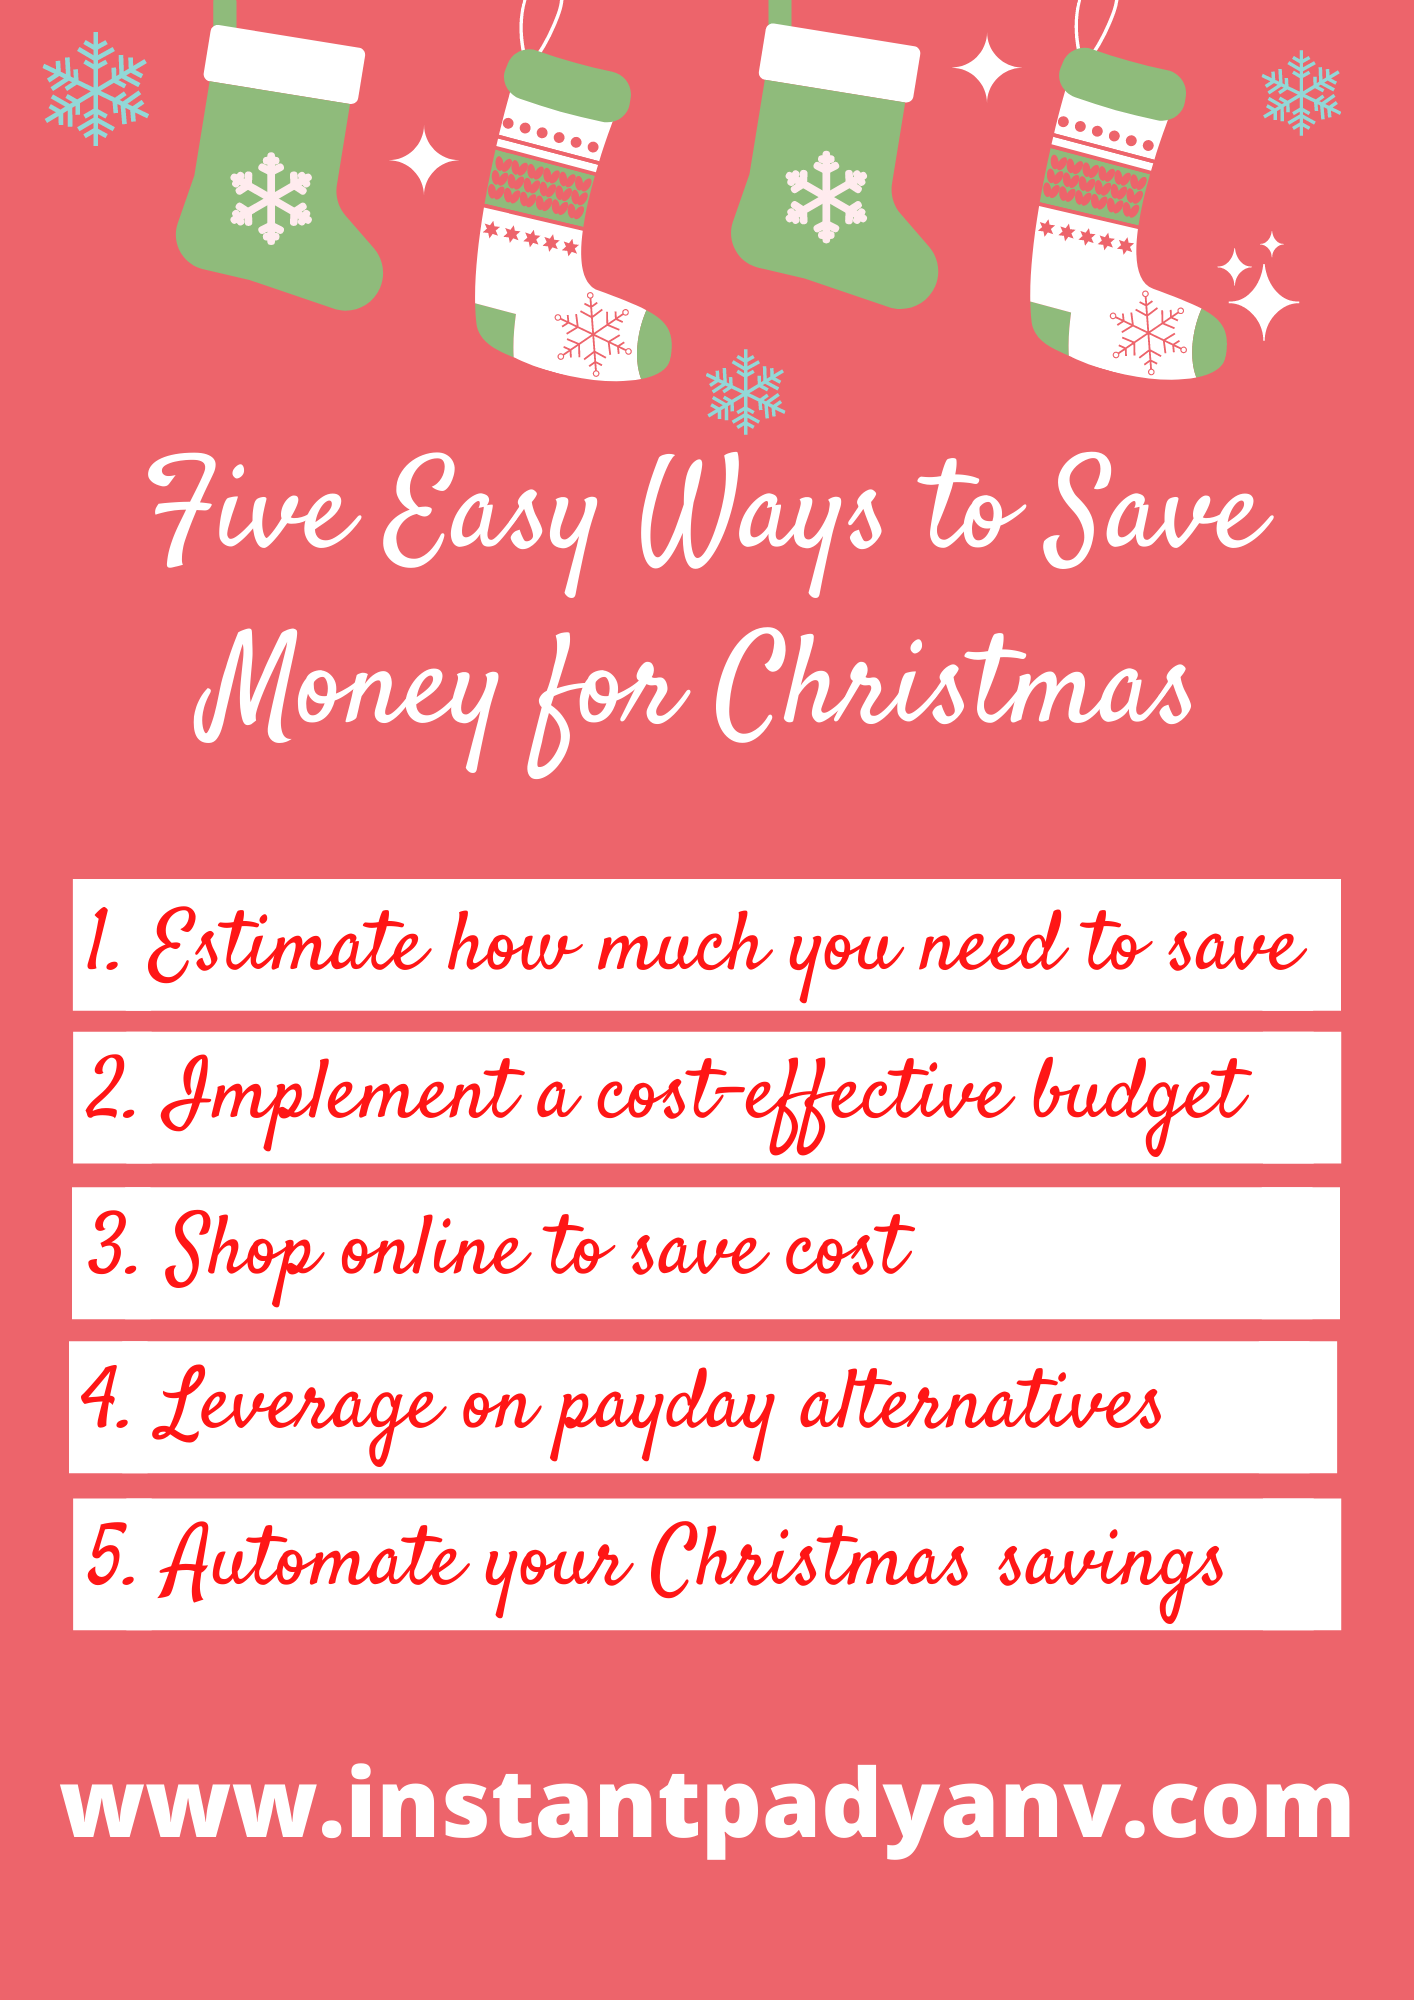 Five Easy Ways to Save Money for Christmas